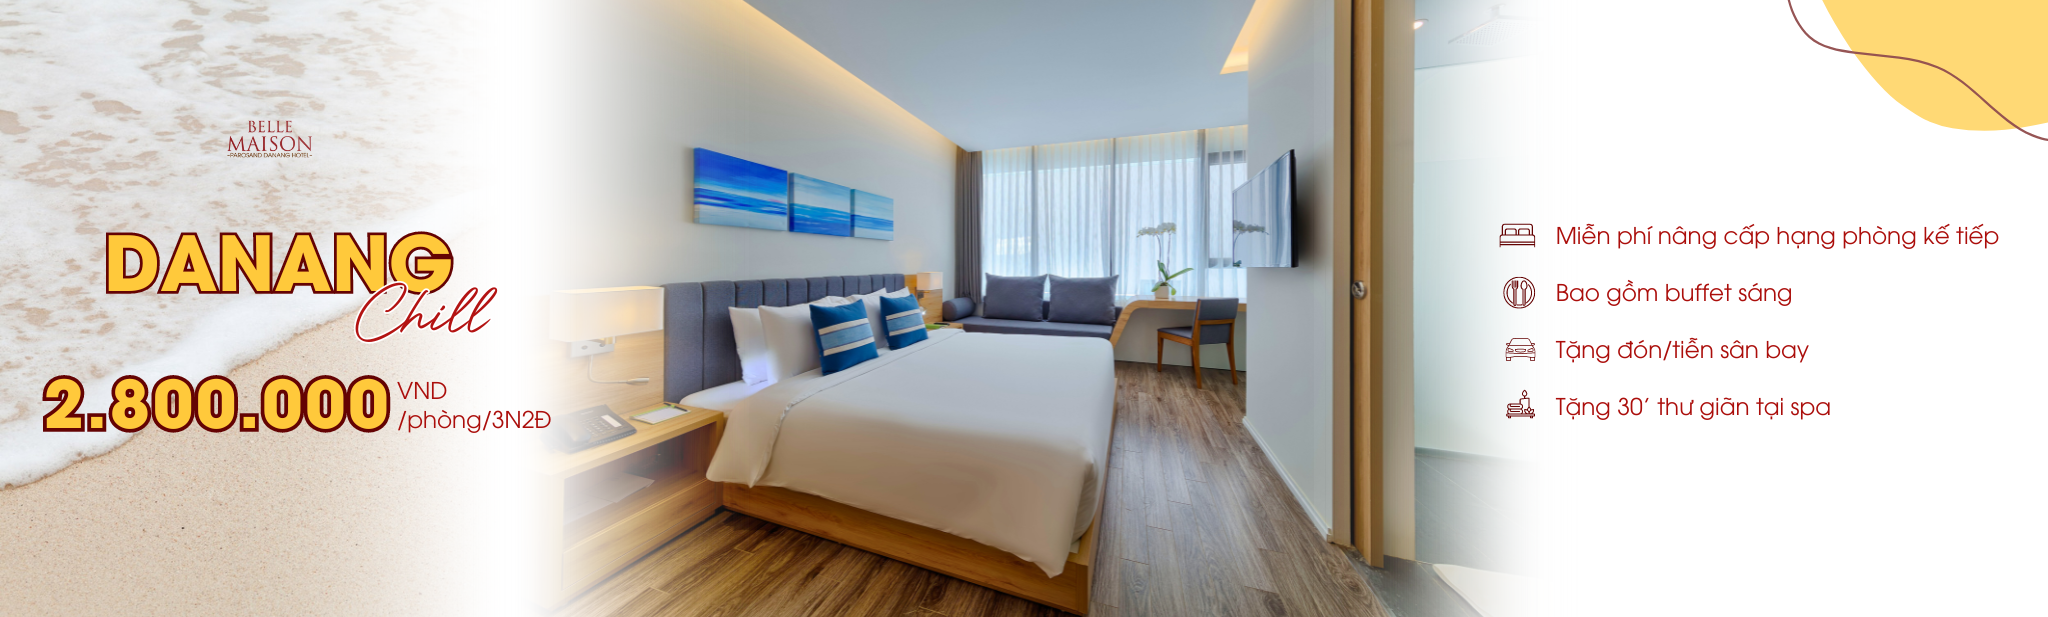 BEST DEAL, BEST STAY THIS SPRING IN DANANG CITY ONLY 2.800.000VND